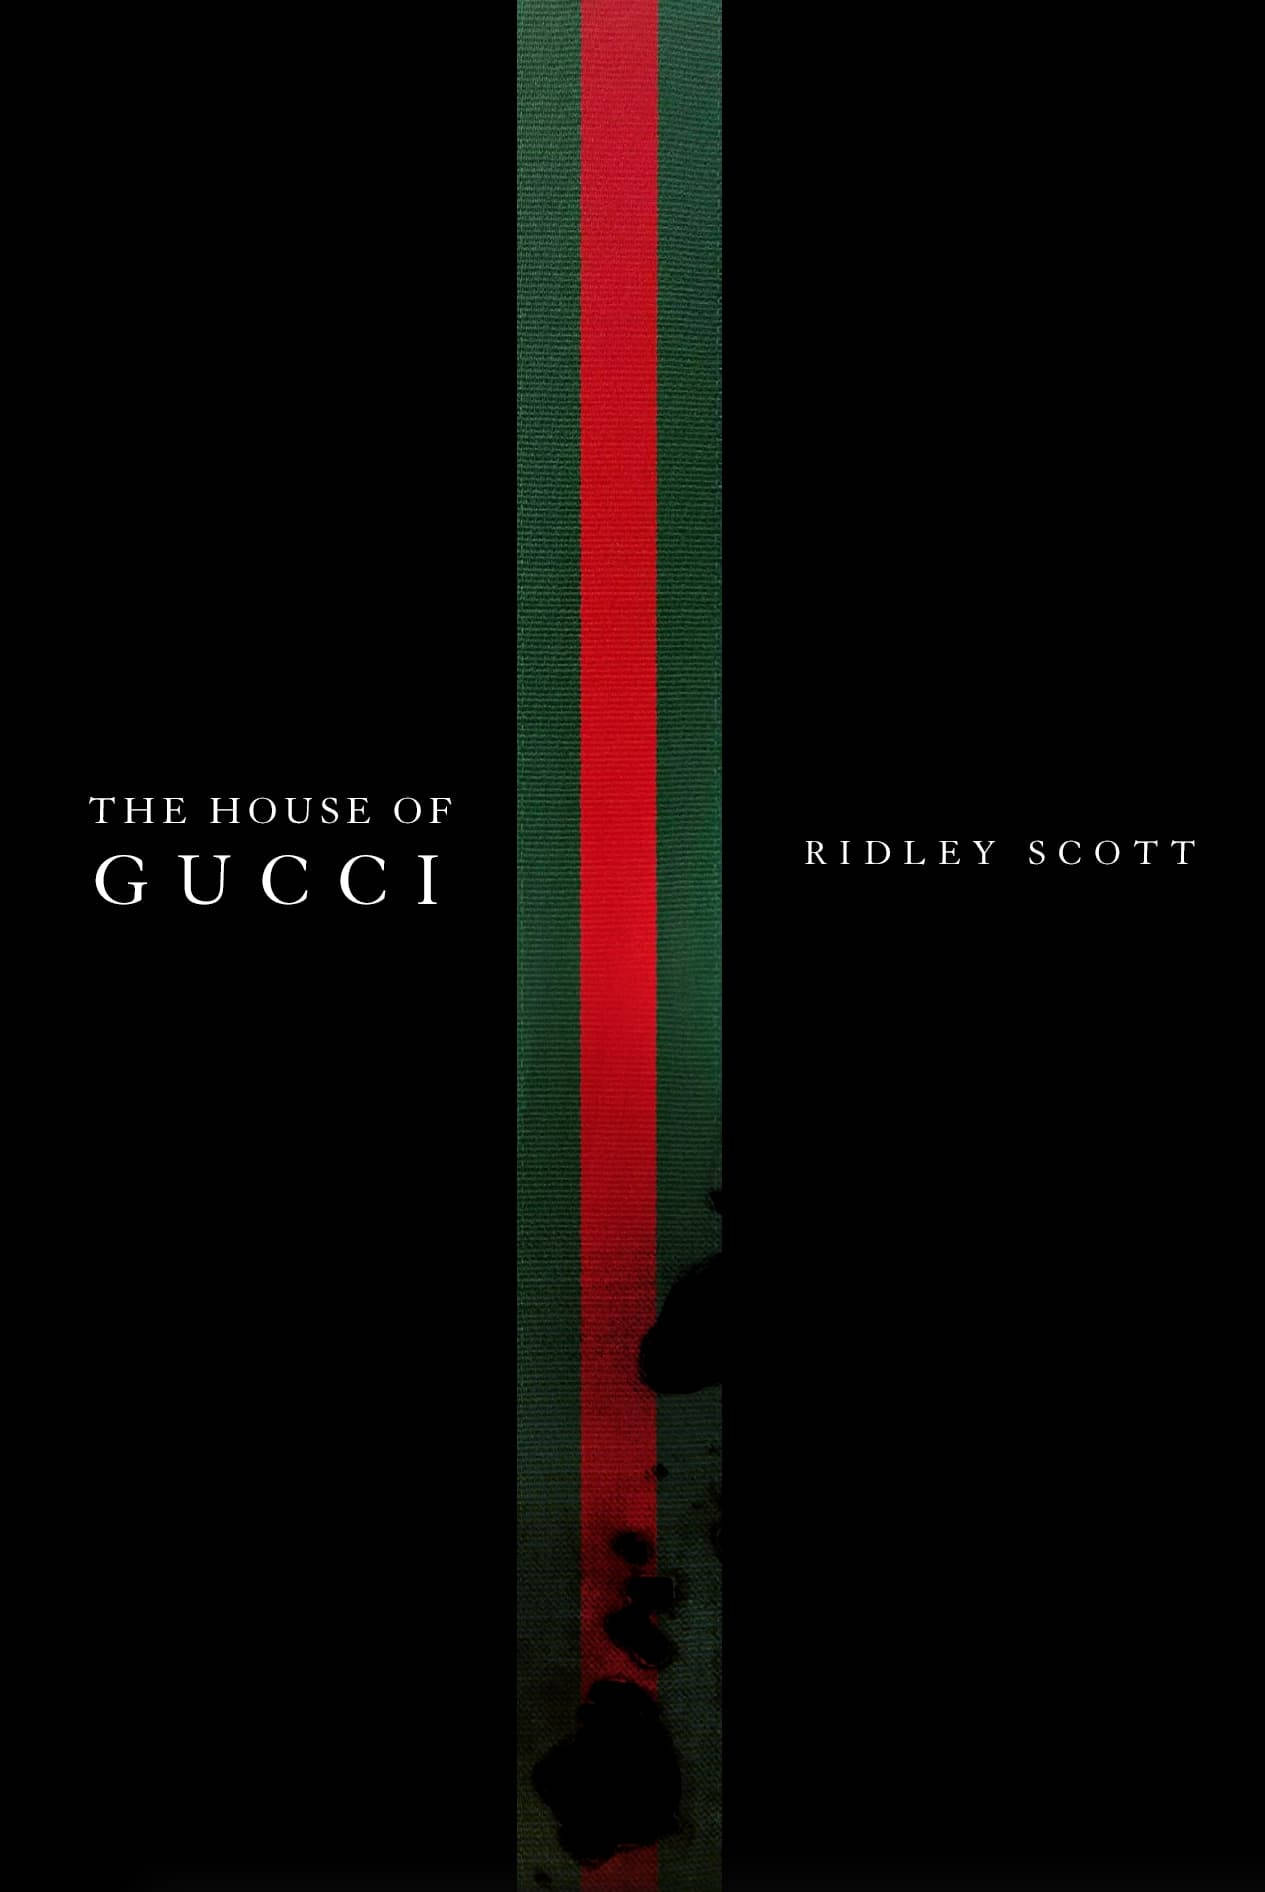 House Of Gucci Signature Stripe Image Background